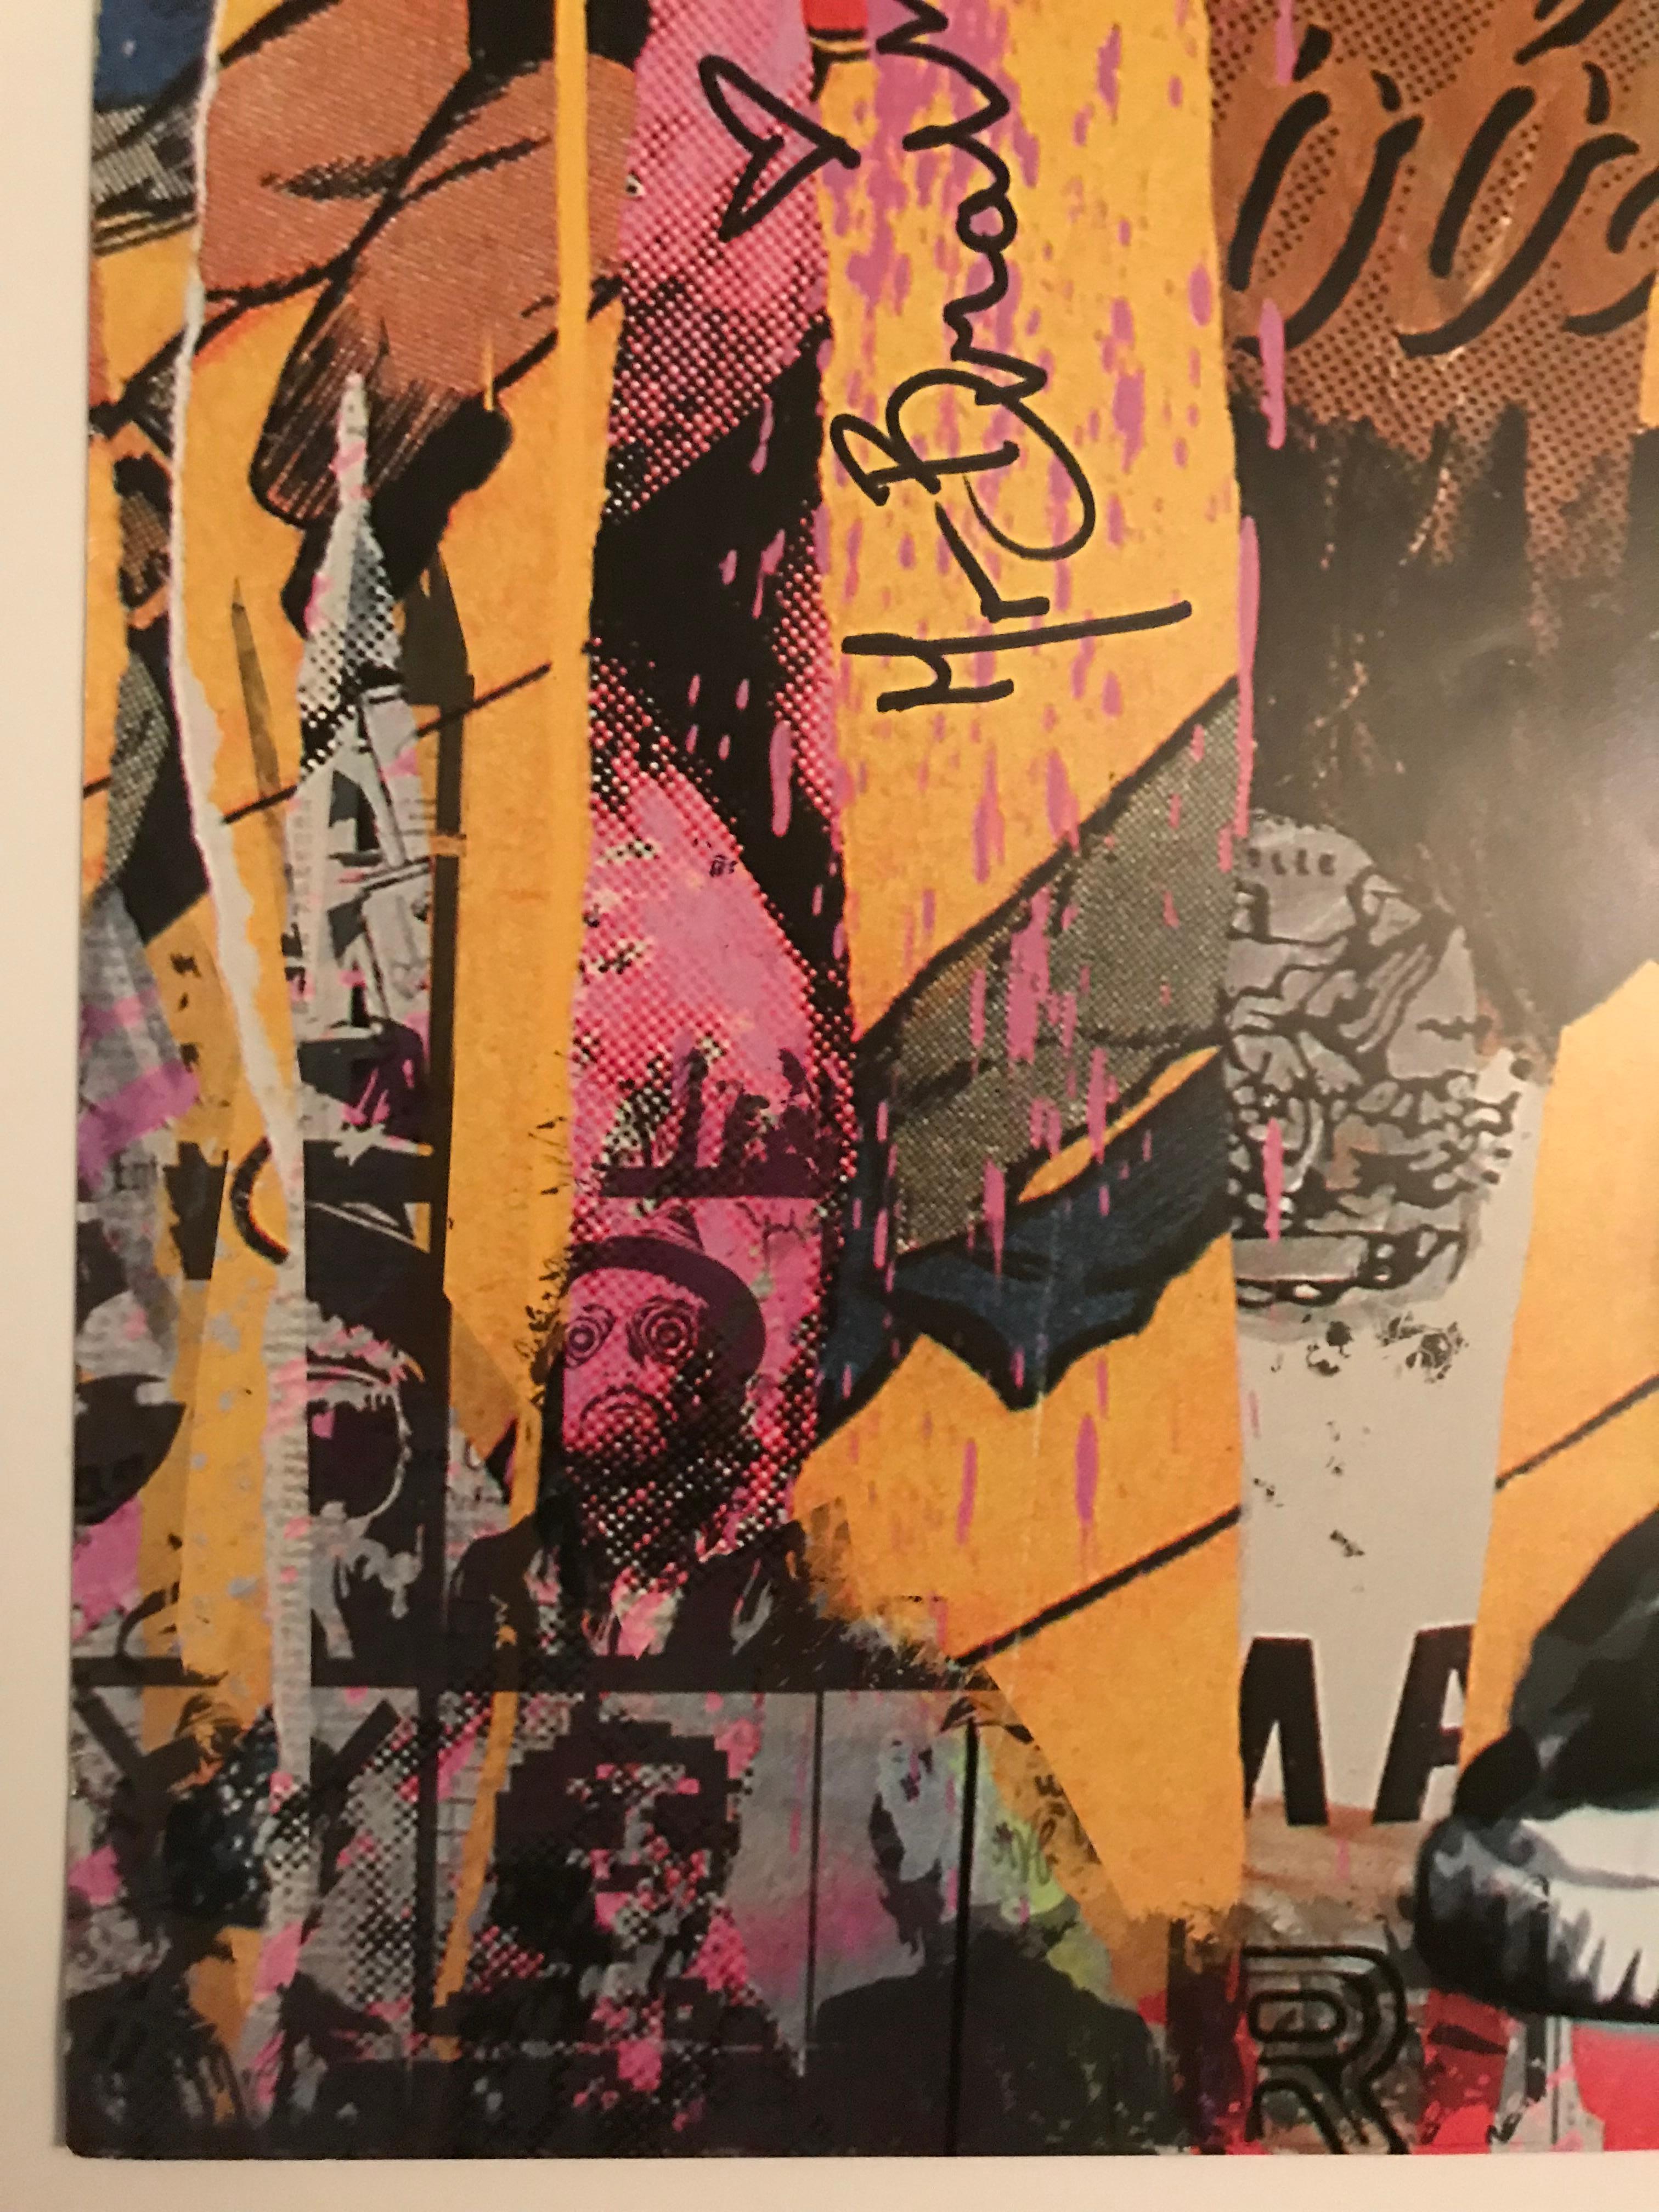 Mr. Brainwash Kate Moss Camera Lithograph Hand Signed NYC ICON'S Street Show en vente 8